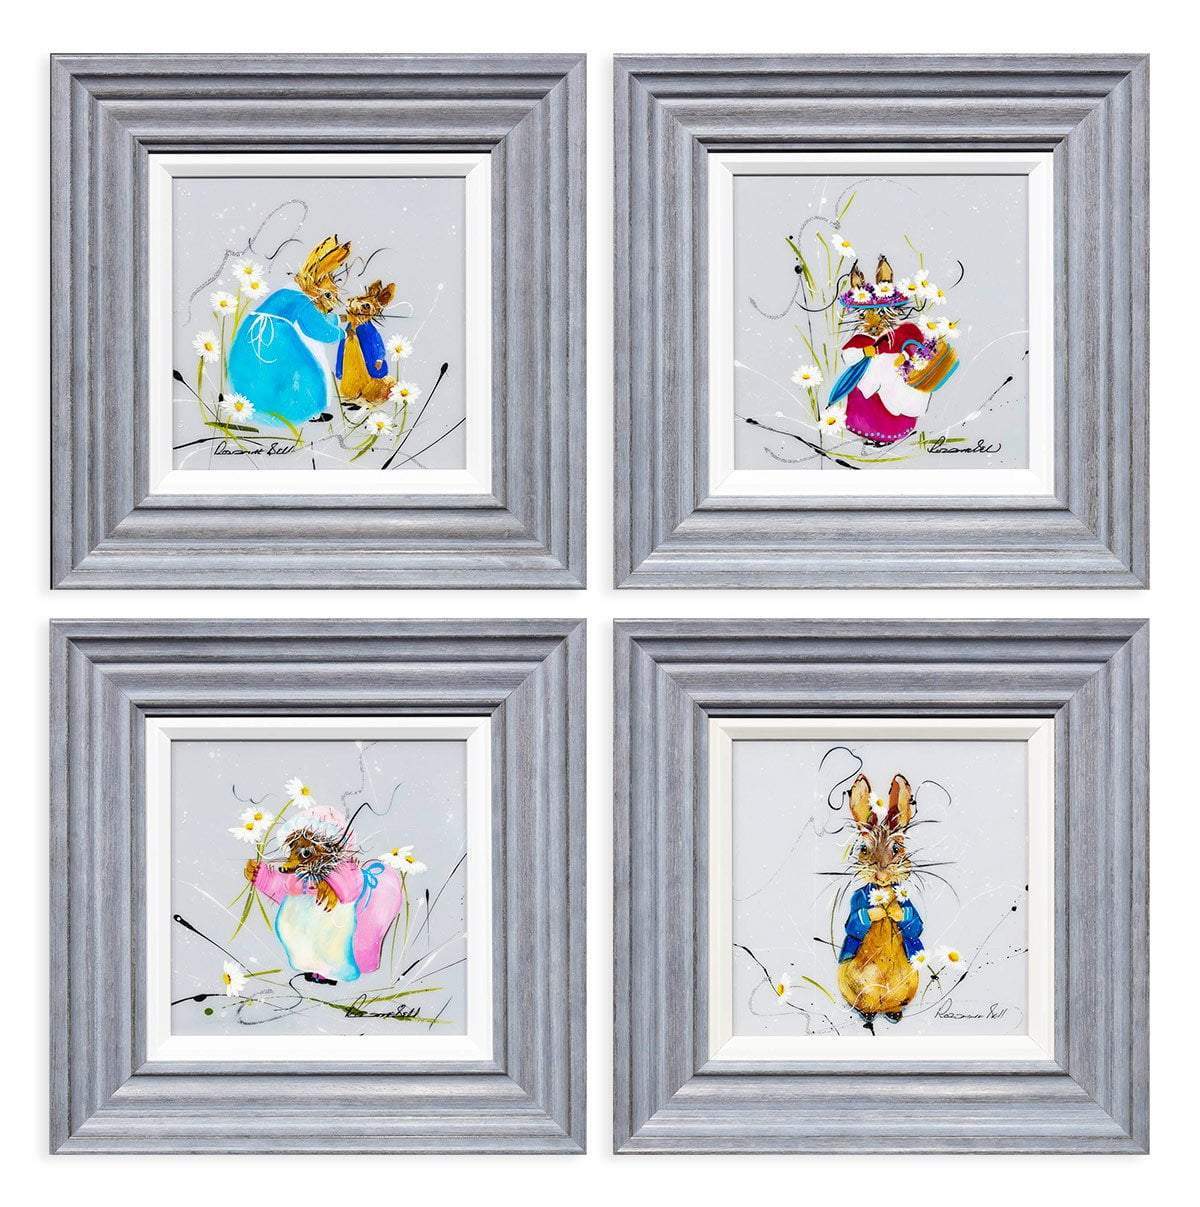 Peter Rabbit &amp; Friends - SOLD Rozanne Bell